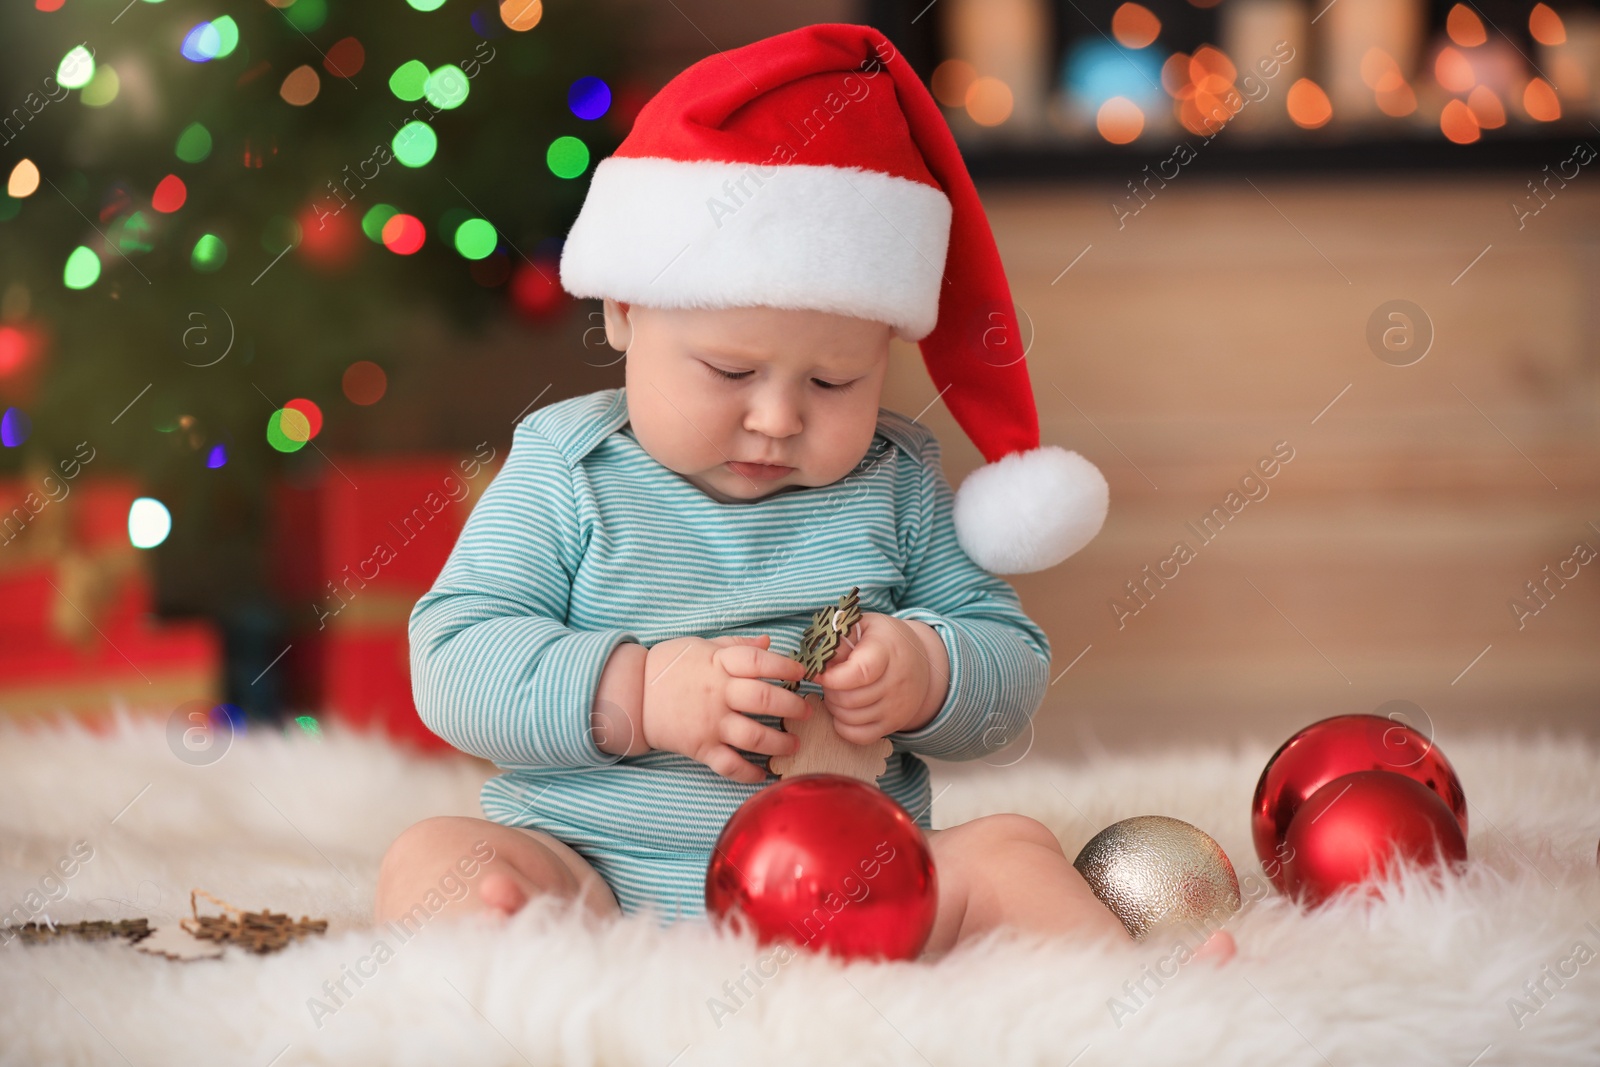 Photo of Little baby in Santa hat playing with Christmas decoration against blurred festive lights indoors